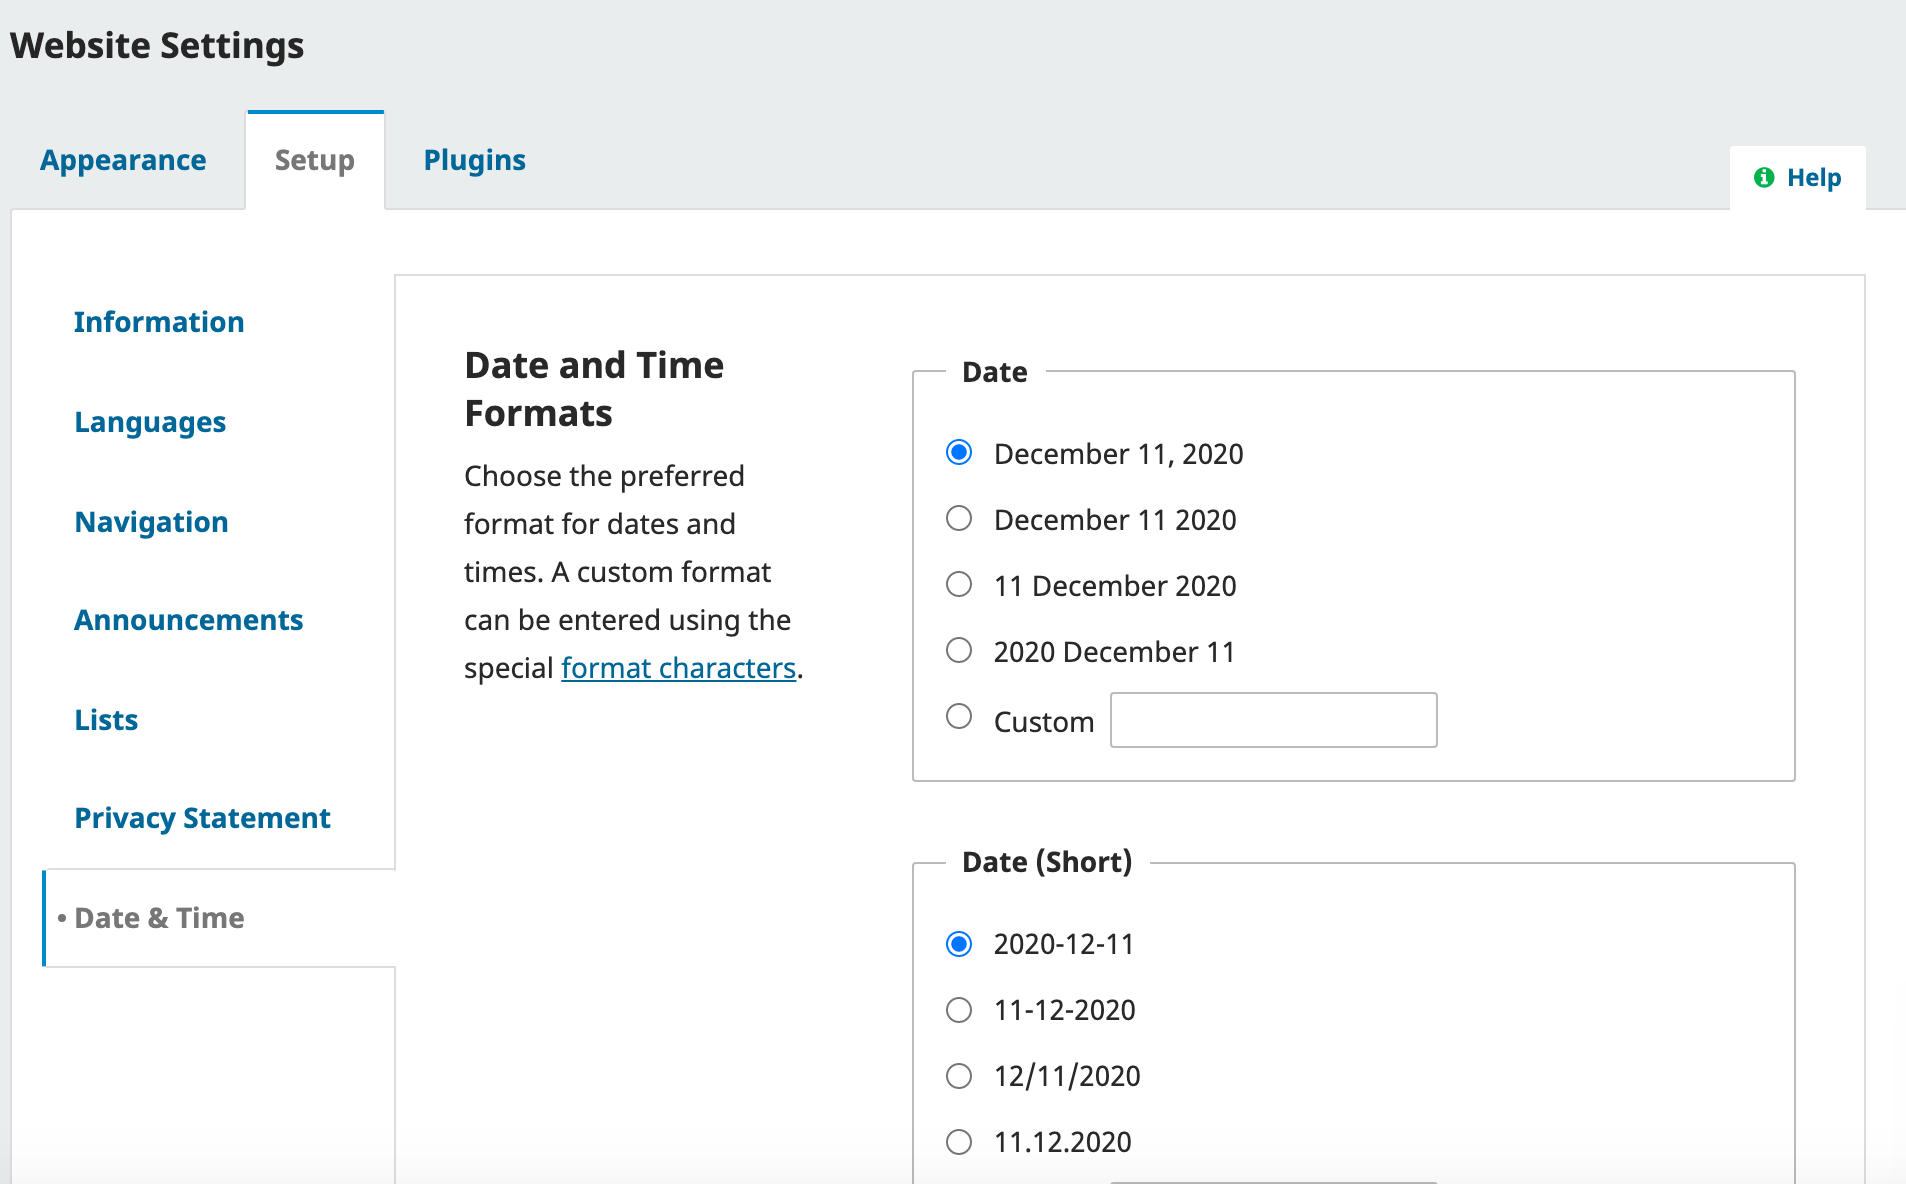 OJS 3.3 Date and Time menu with an option to select long and short date formats.